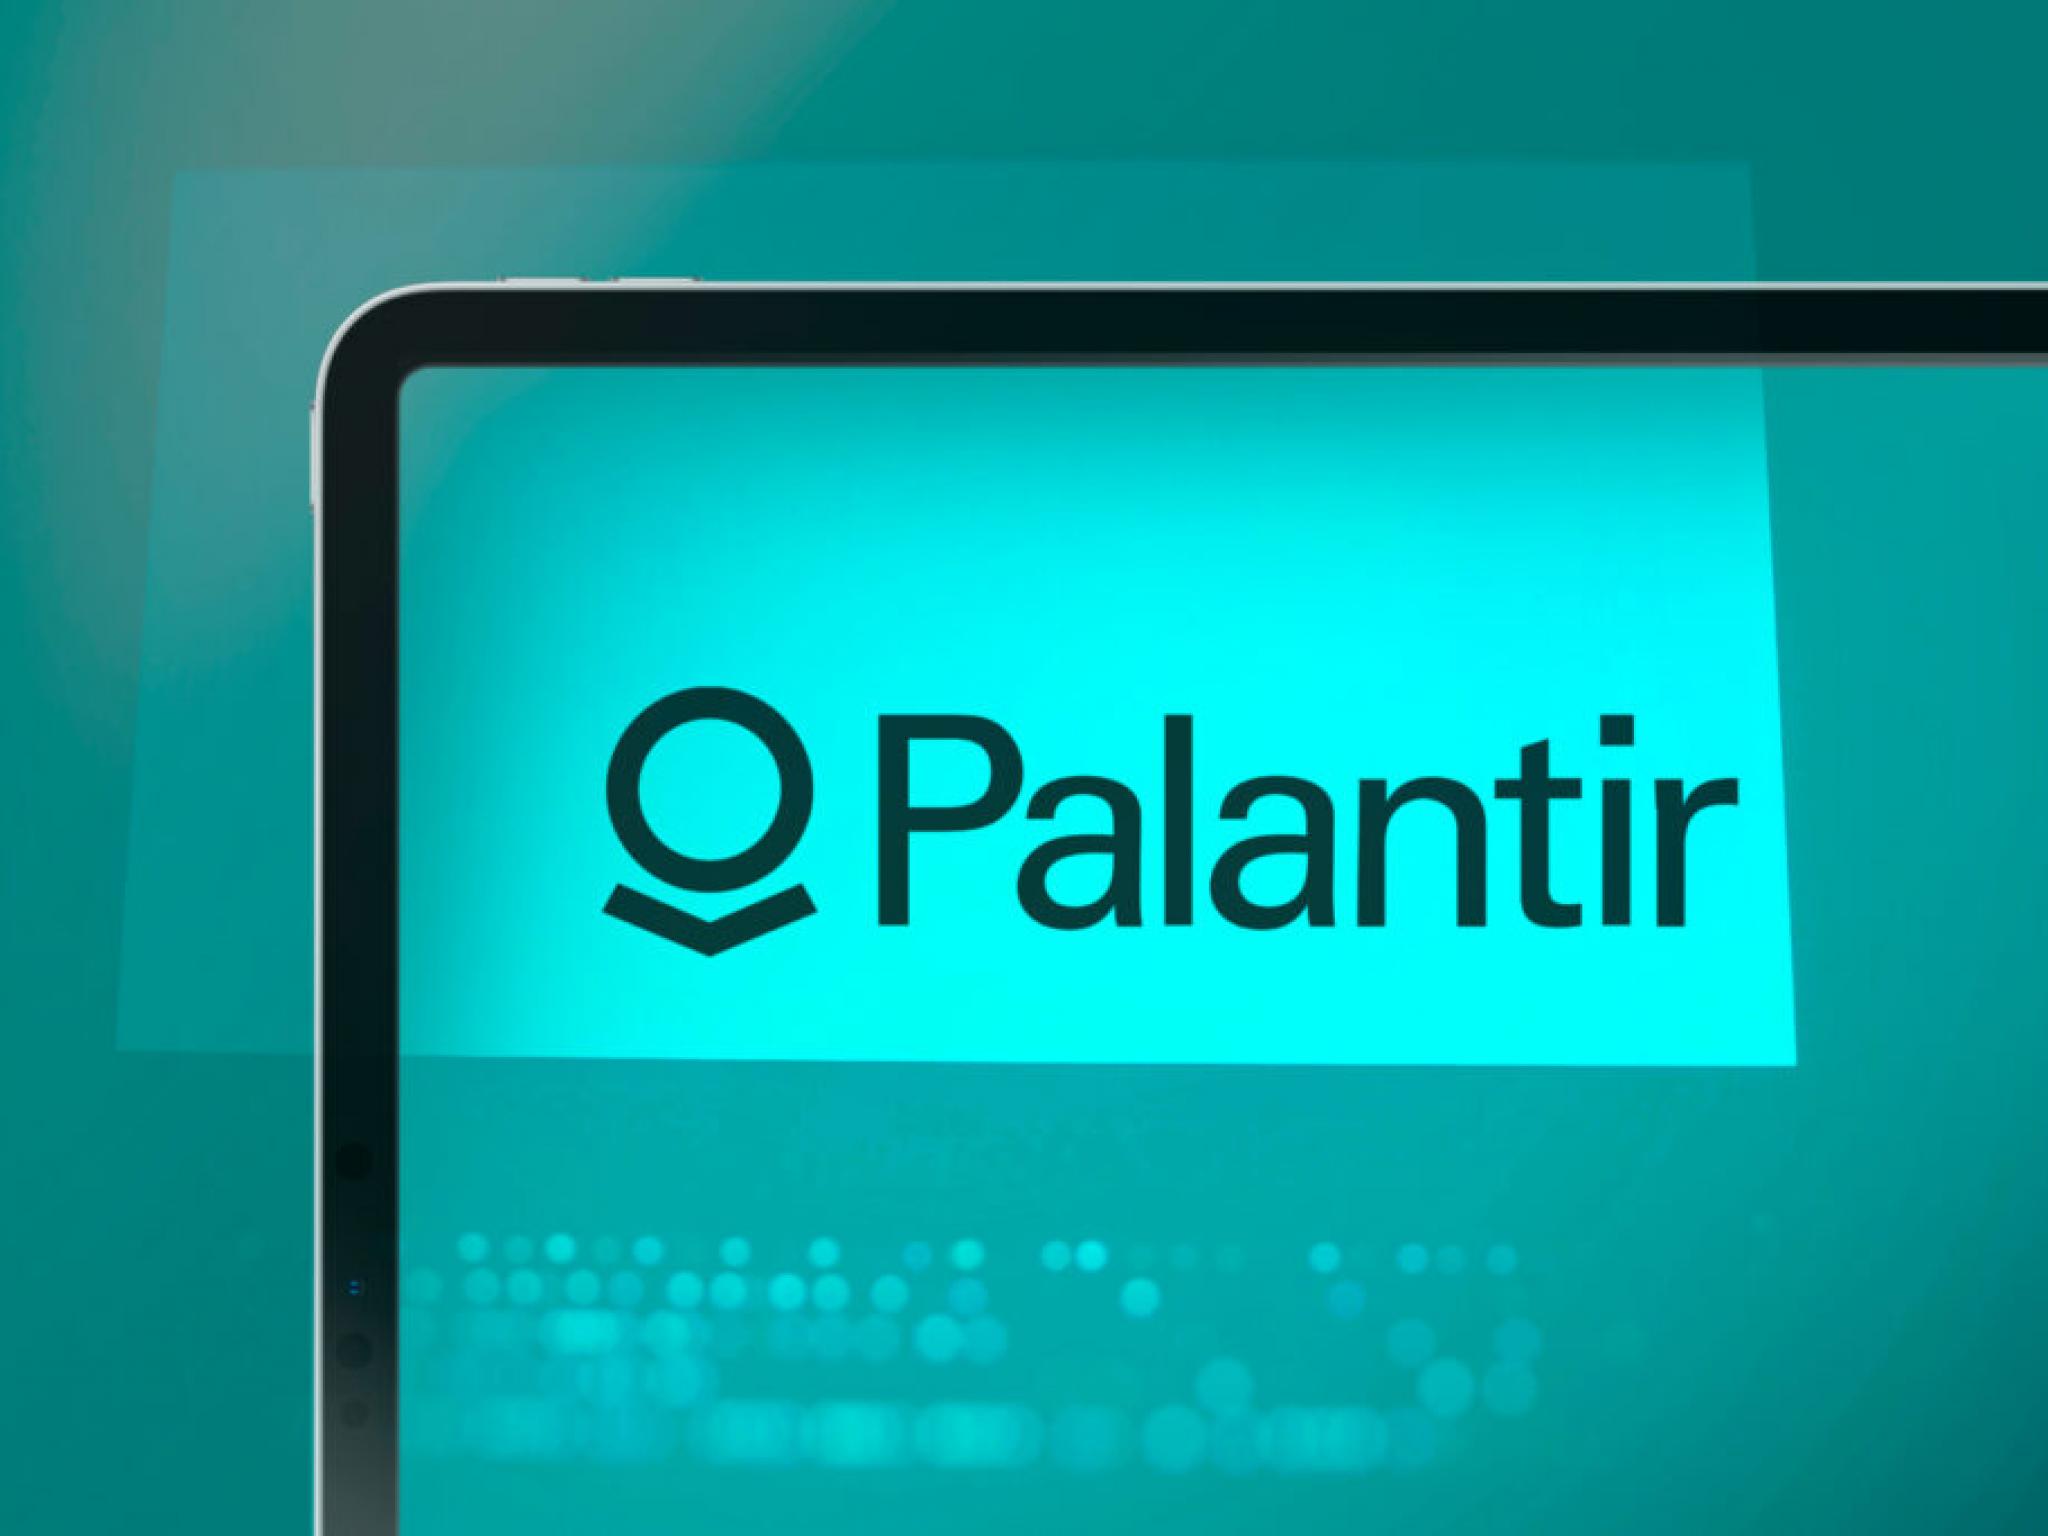  whats-going-on-with-palantir-technologies-shares-monday 